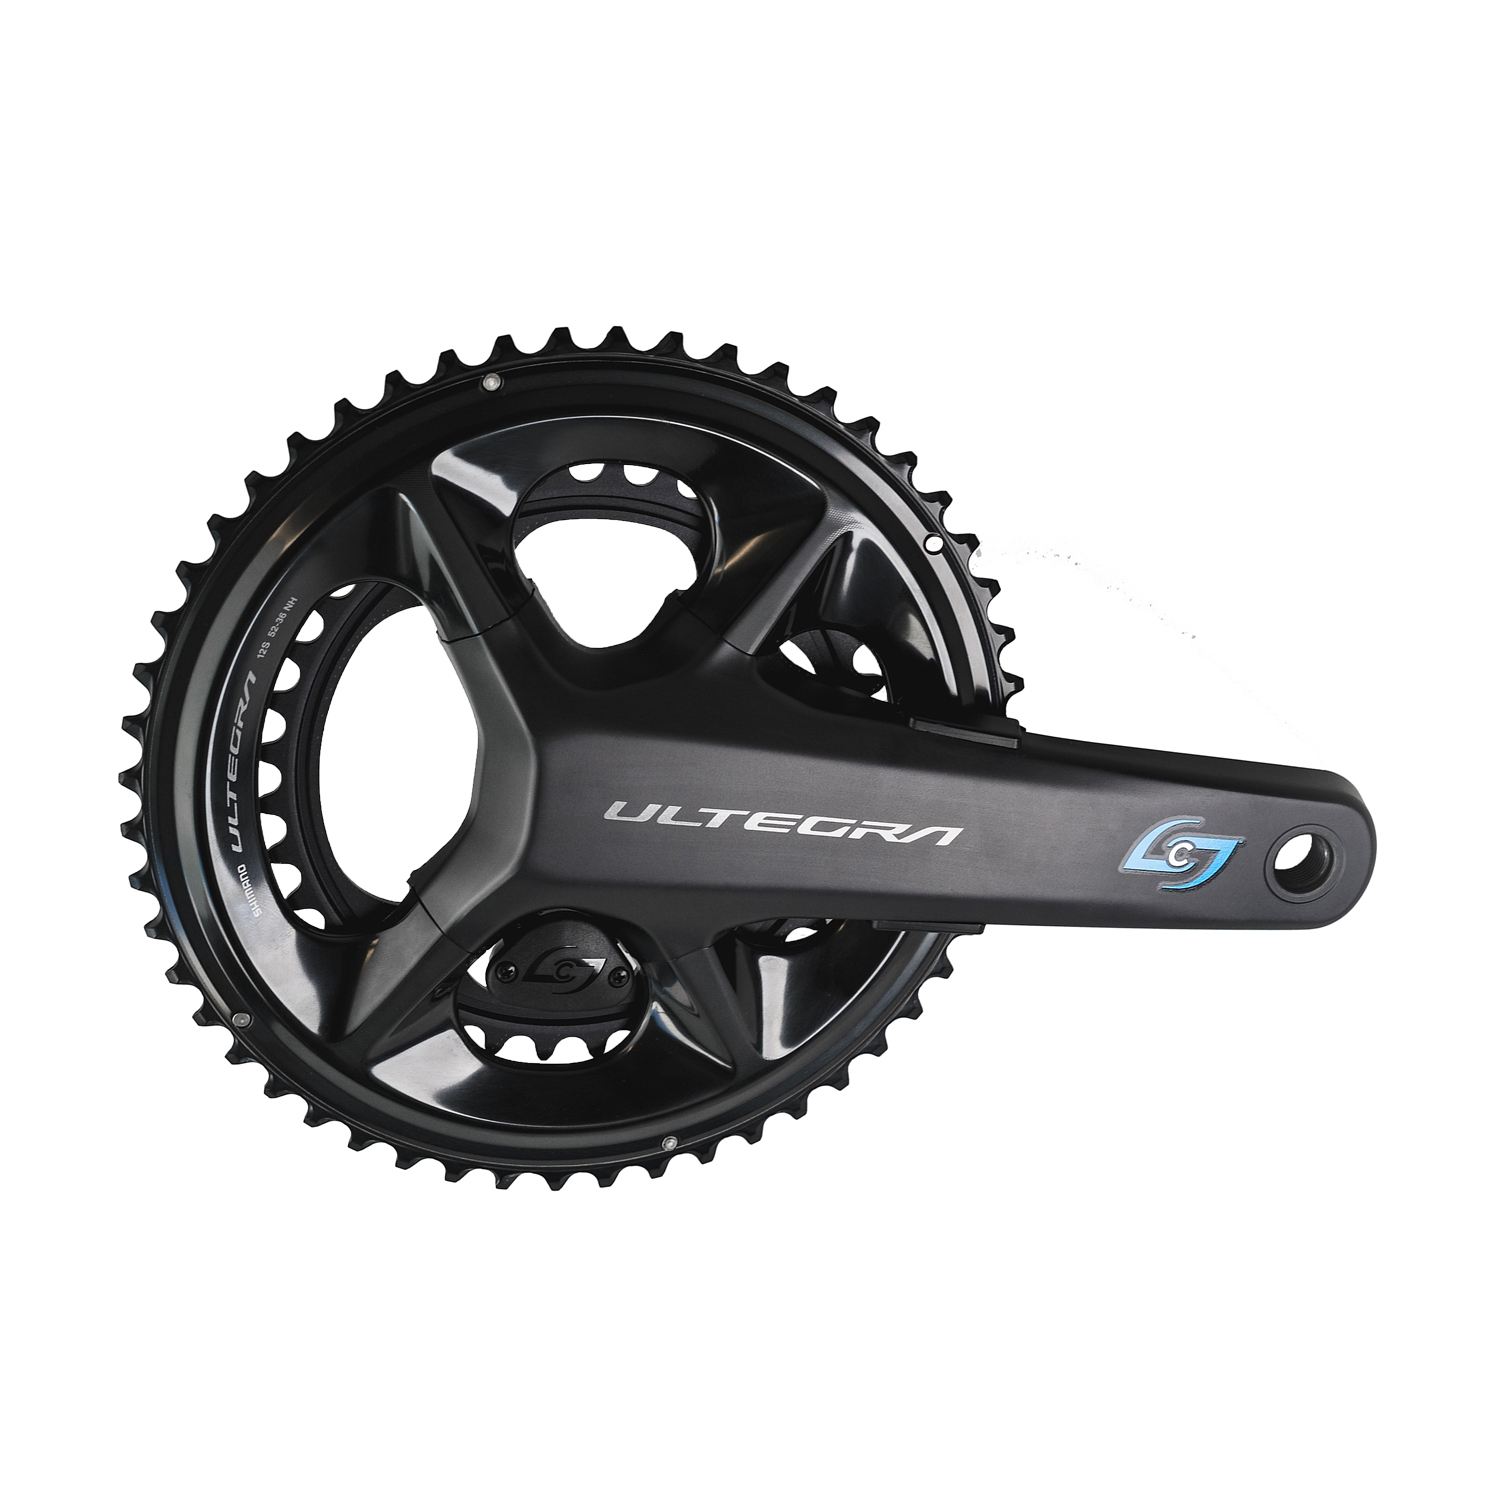 stages cycling kurbeln stages power r - shimano ultegra r8000 - 165mn 50/34 noir uomo